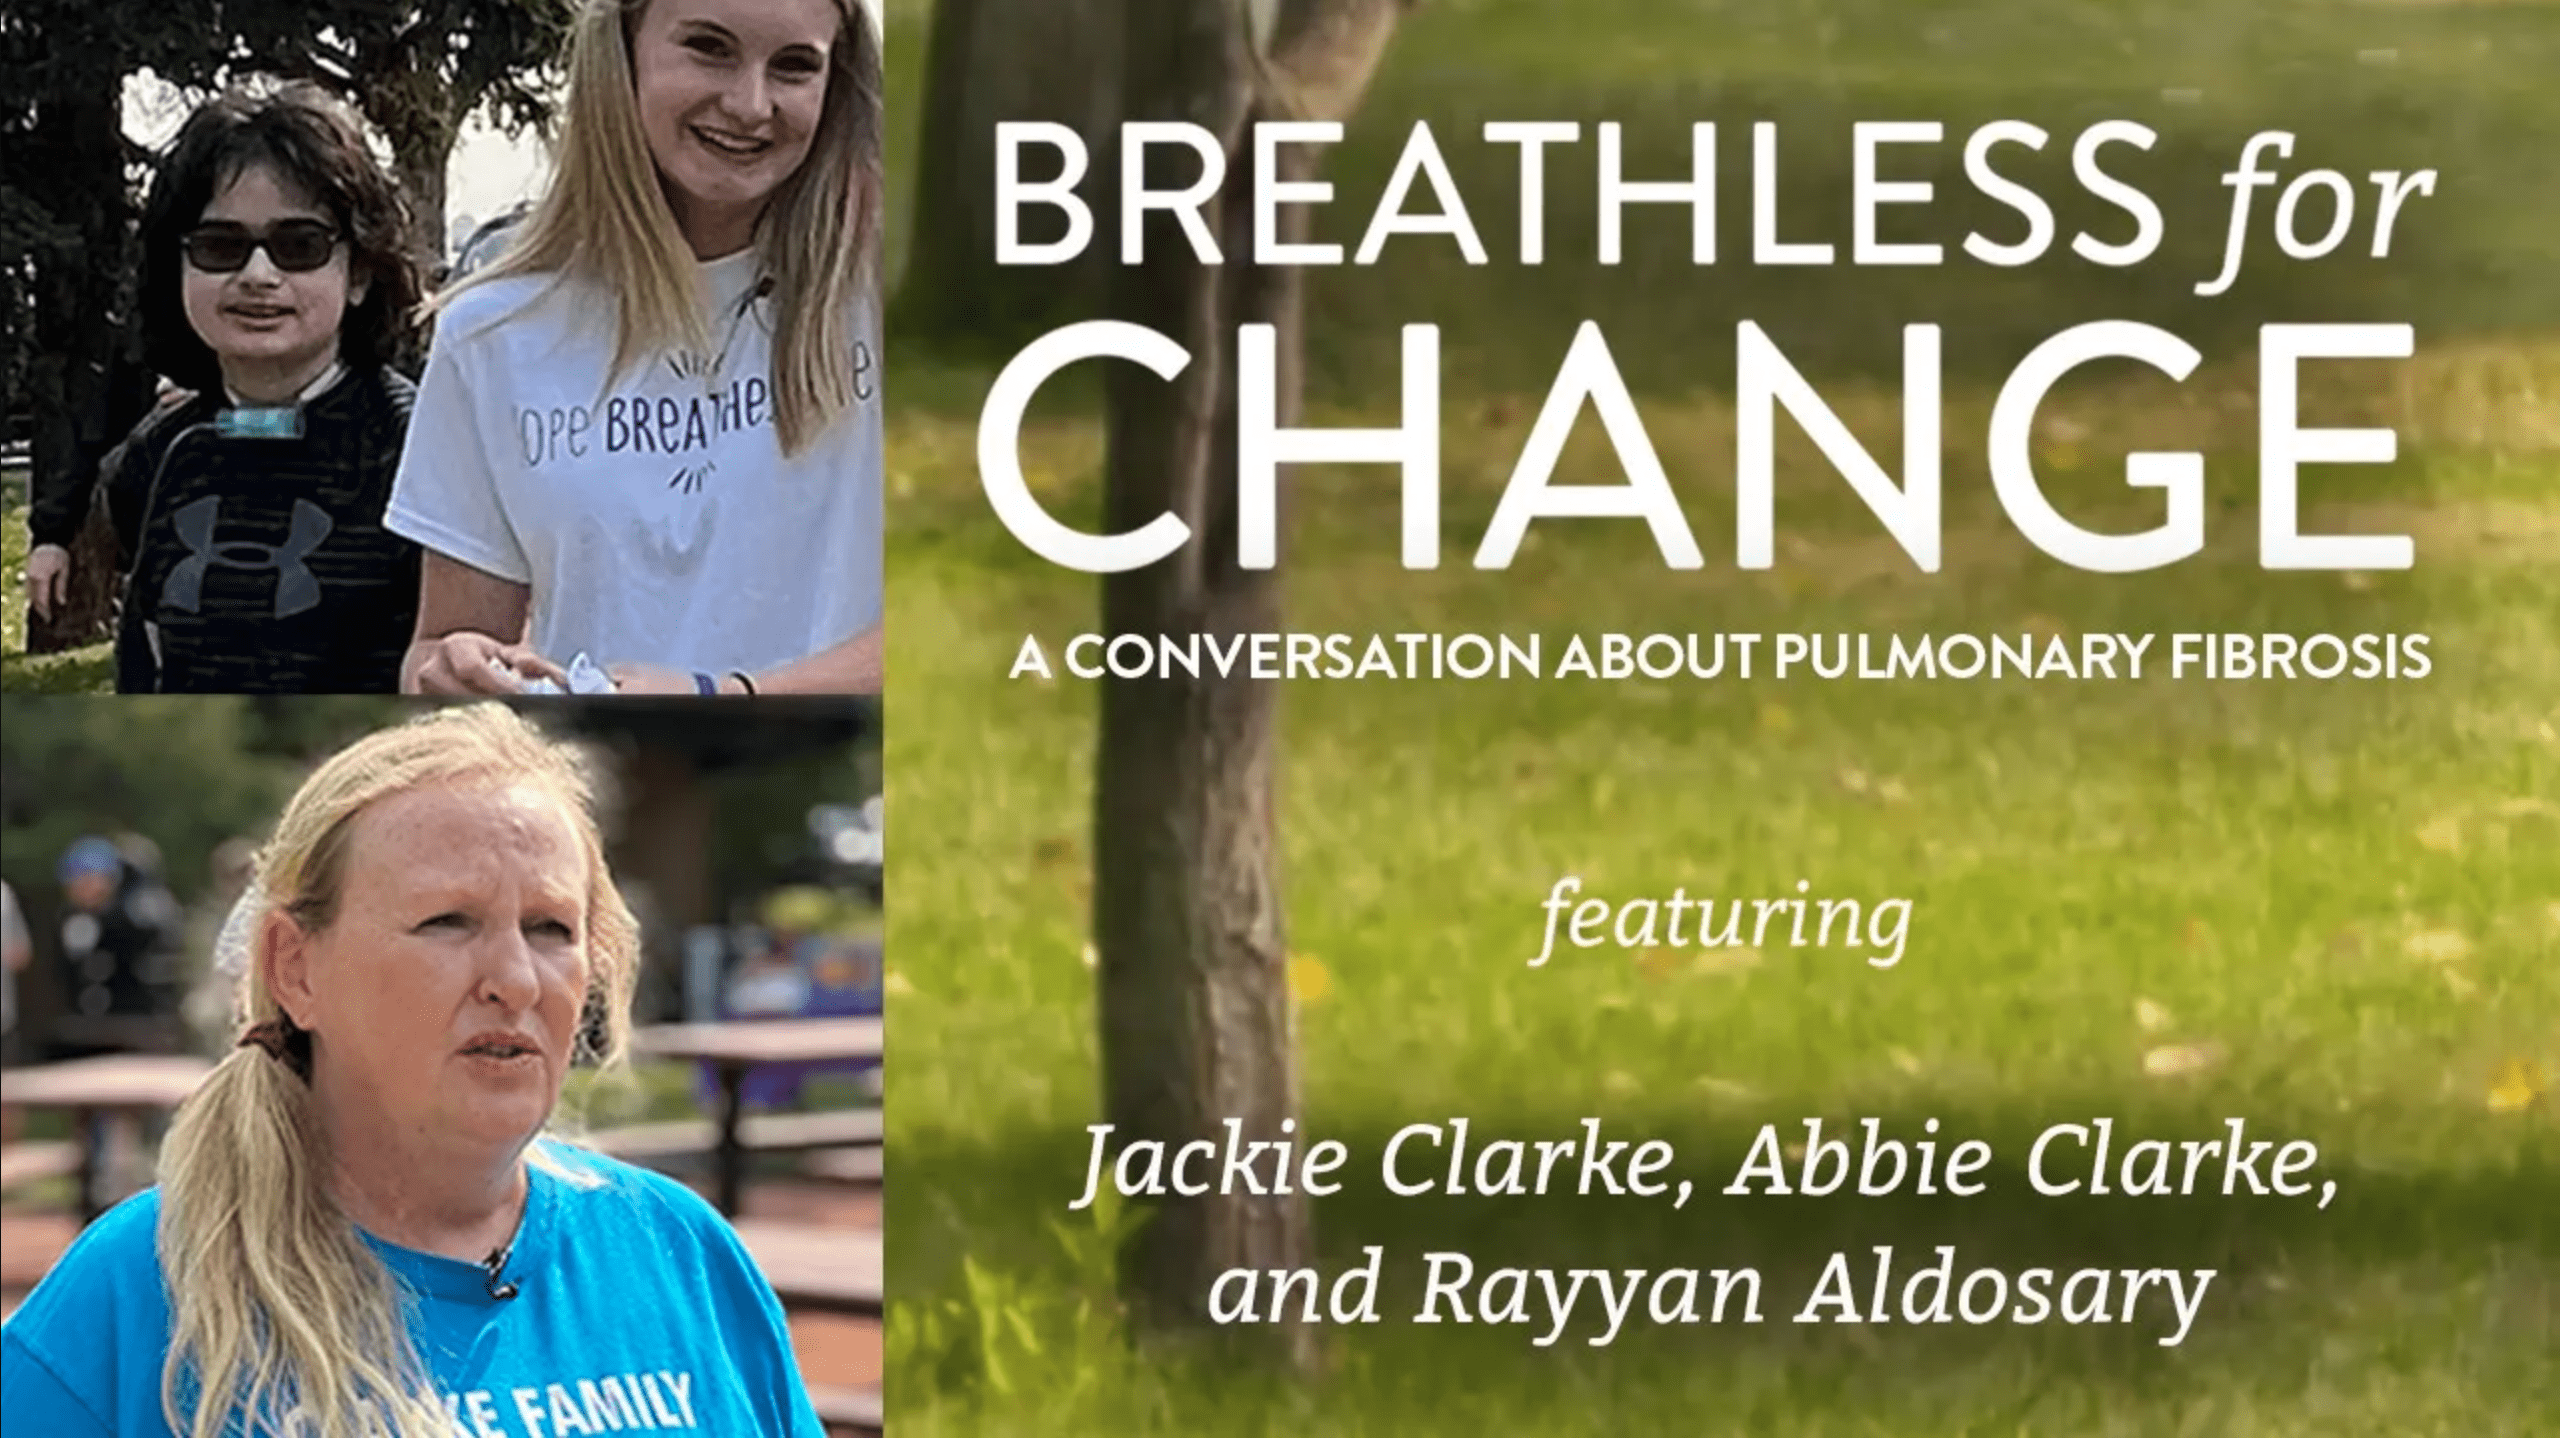 Girl, boy, and woman with text: "BREATHLESS for CHANGE: A CONVERSATION ABOUT PULMONARY FIBROSIS featuring Jackie Clarke, Abbie Clarke, and Rayyan Aldosary"